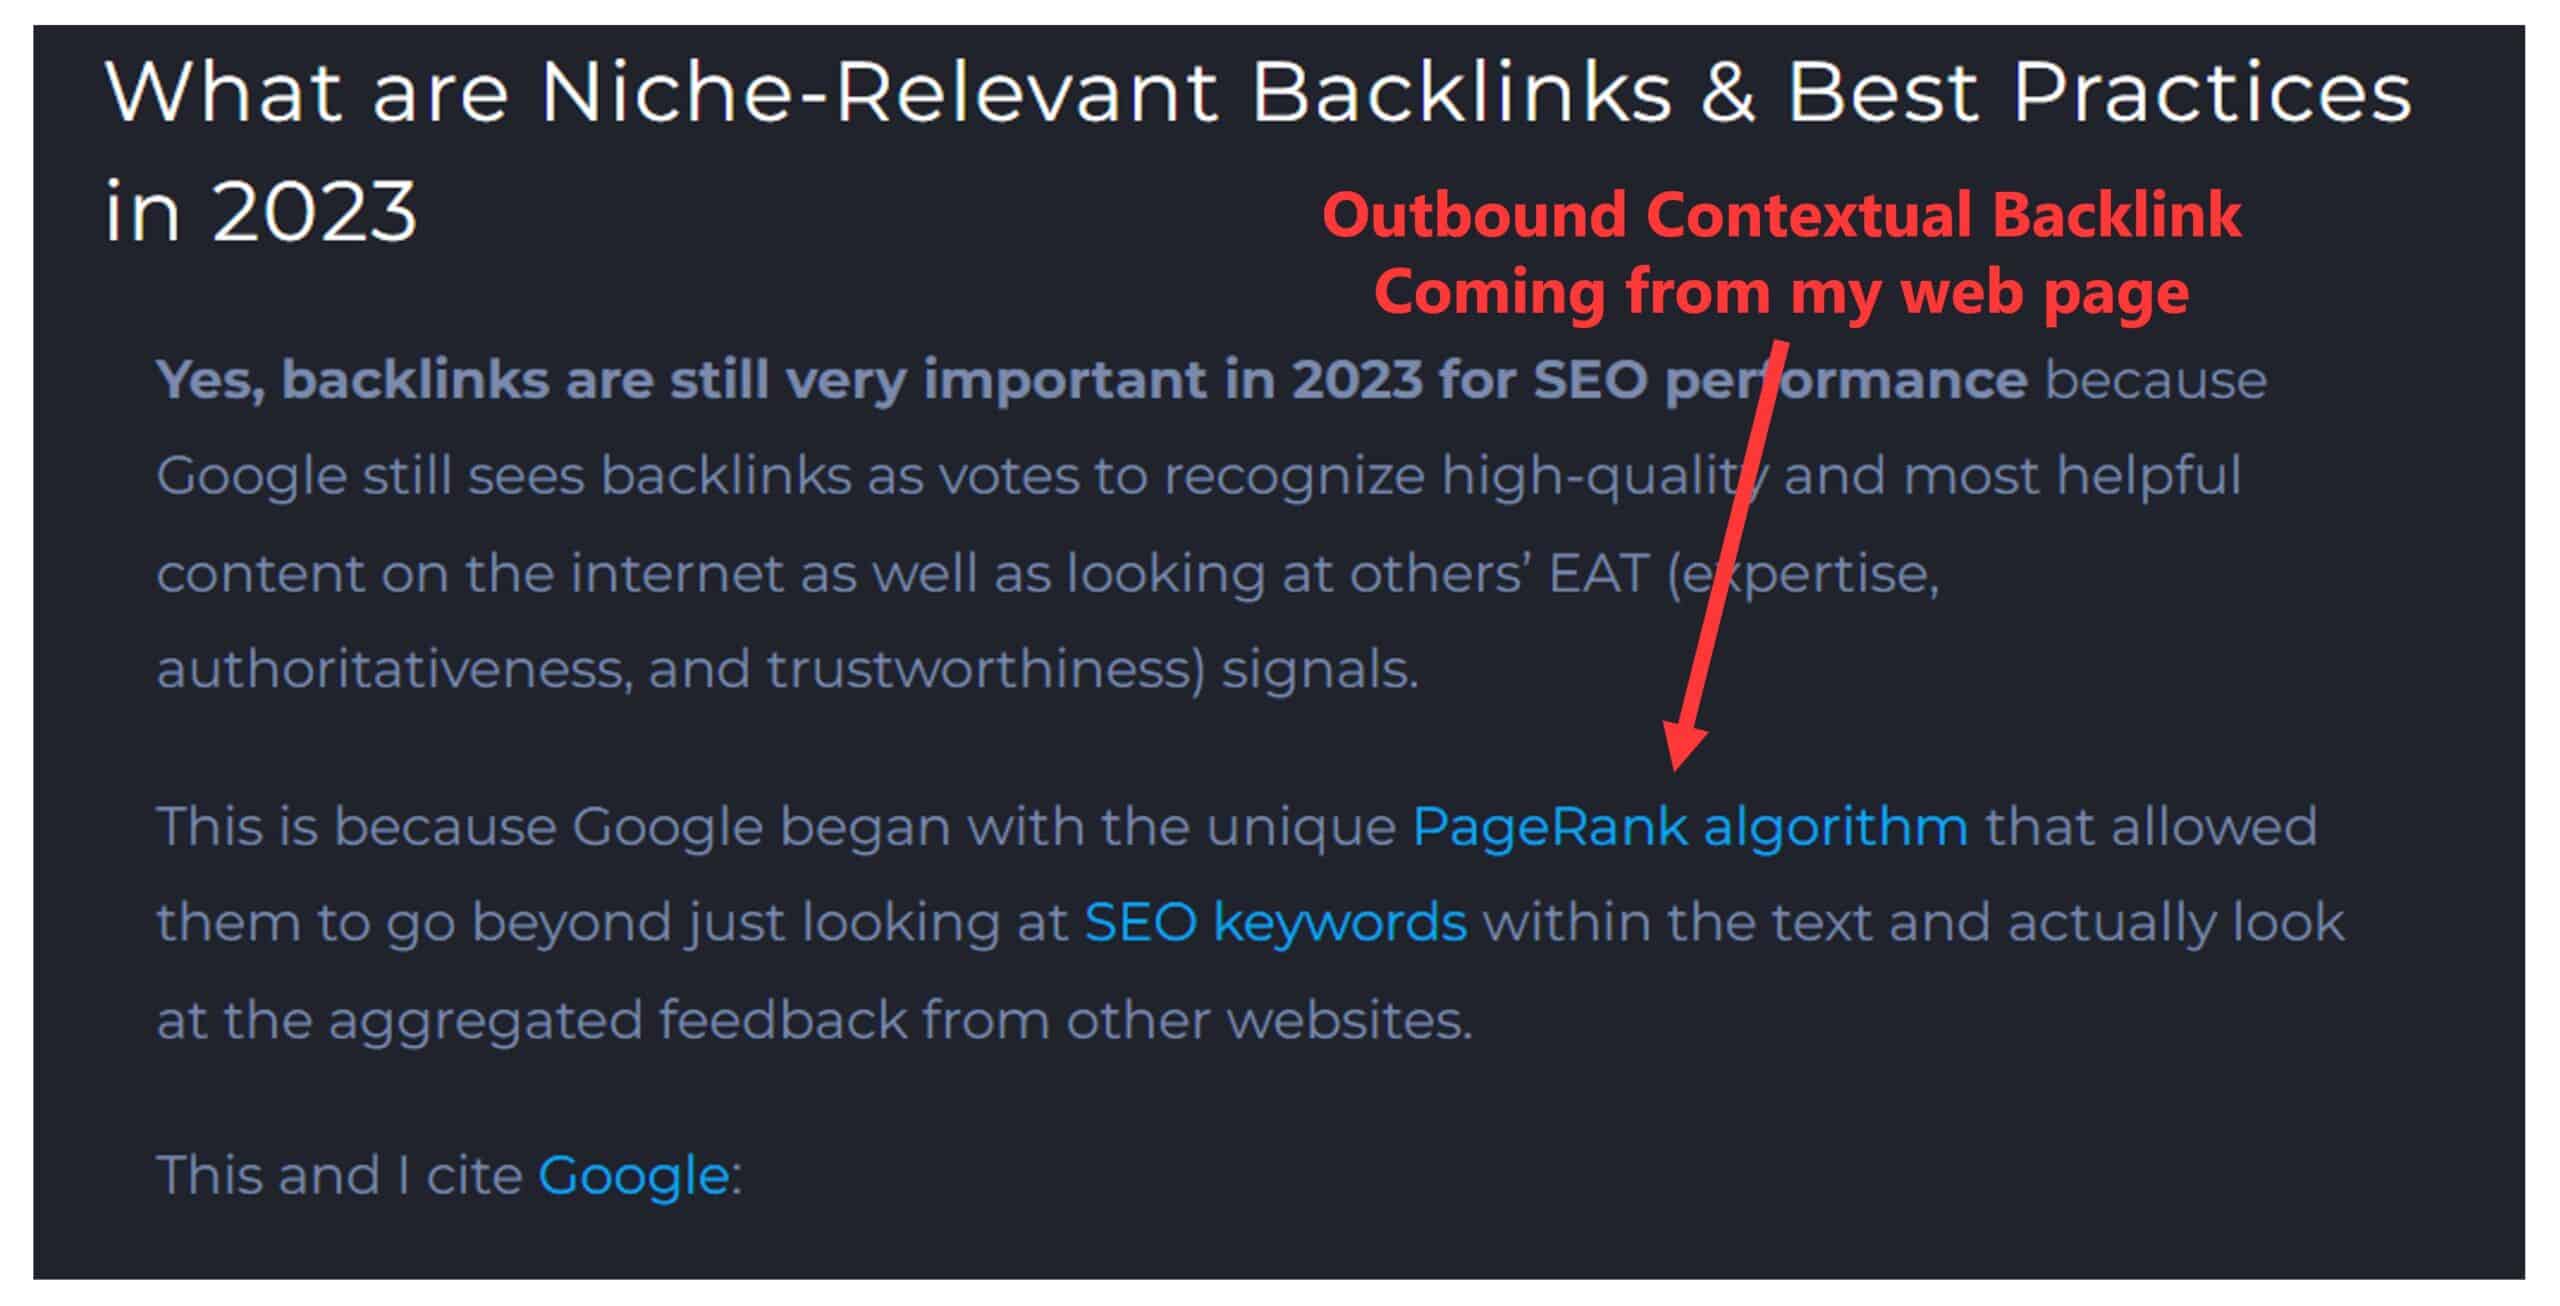 example of what are outbound contextual backlinks